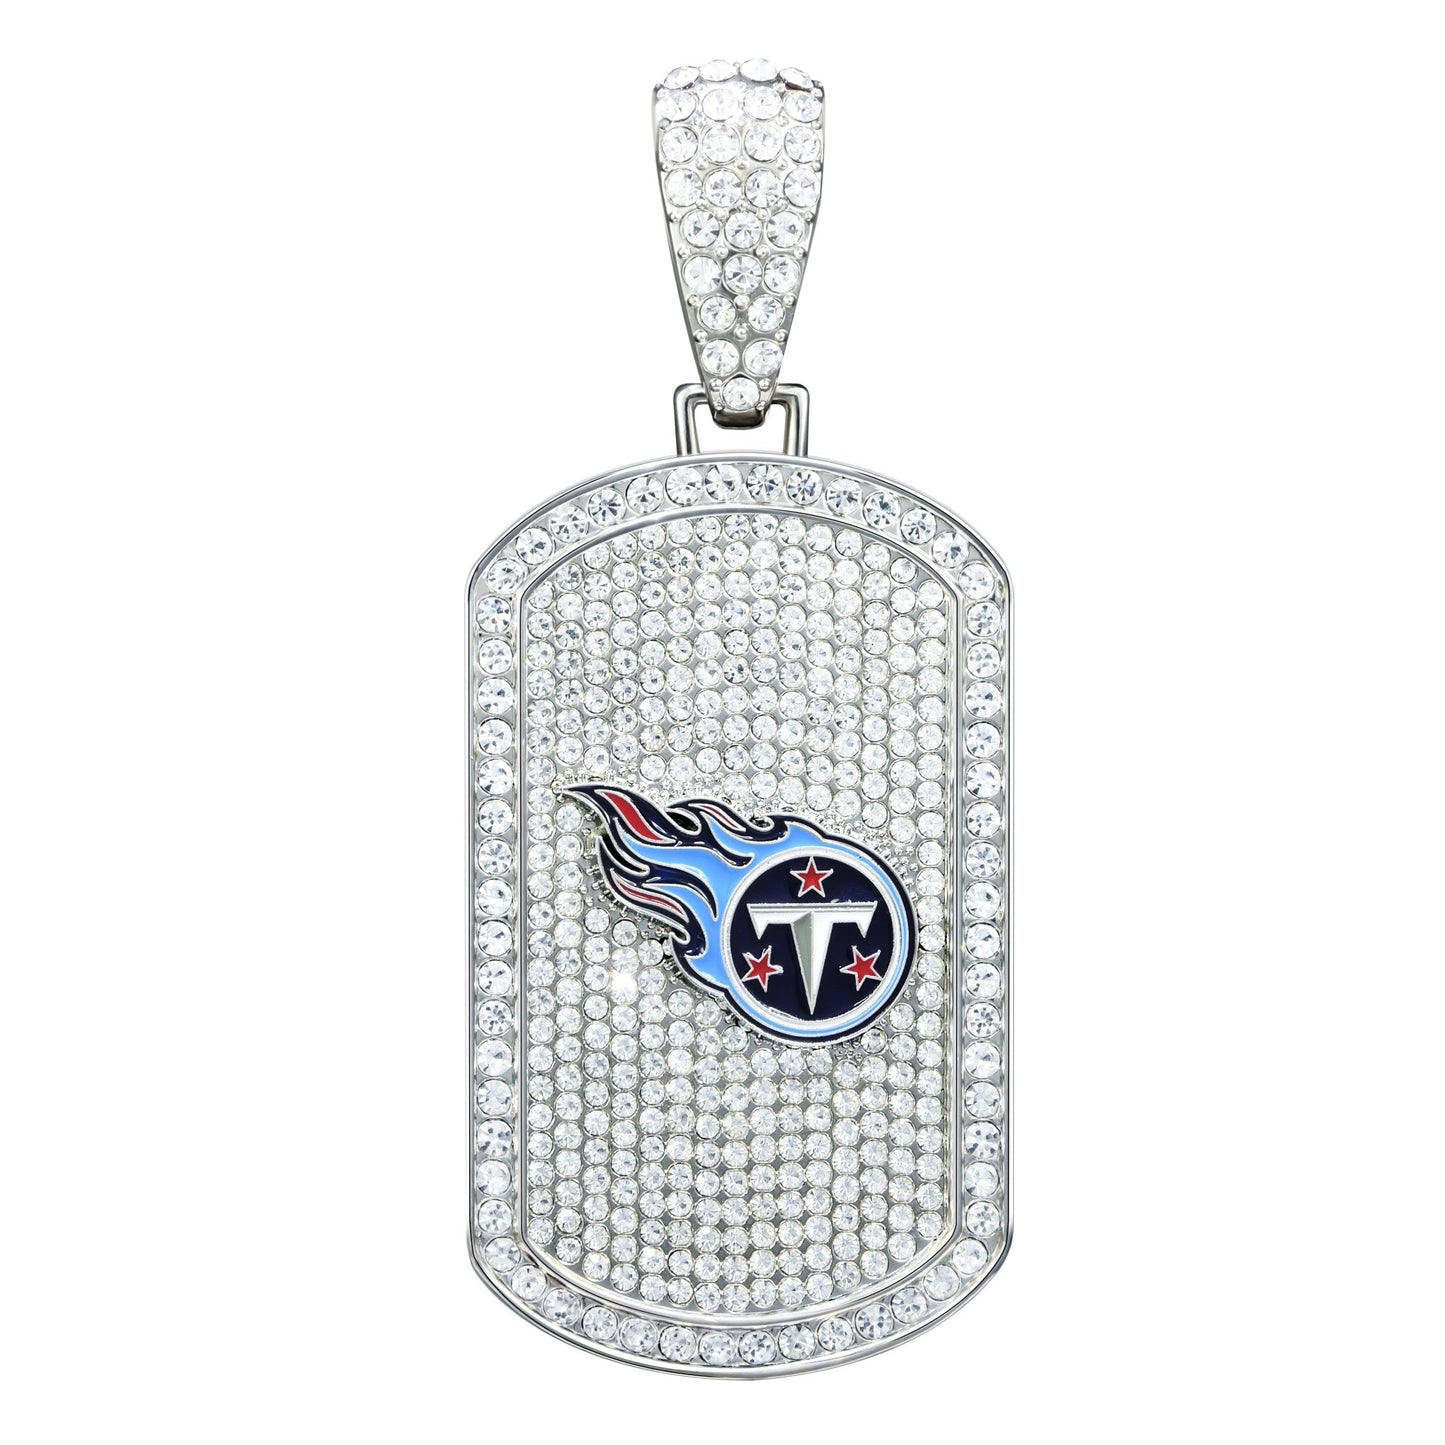 NFL Bling Dog Tag Necklace - Gamedays Gear - Tennessee Titans